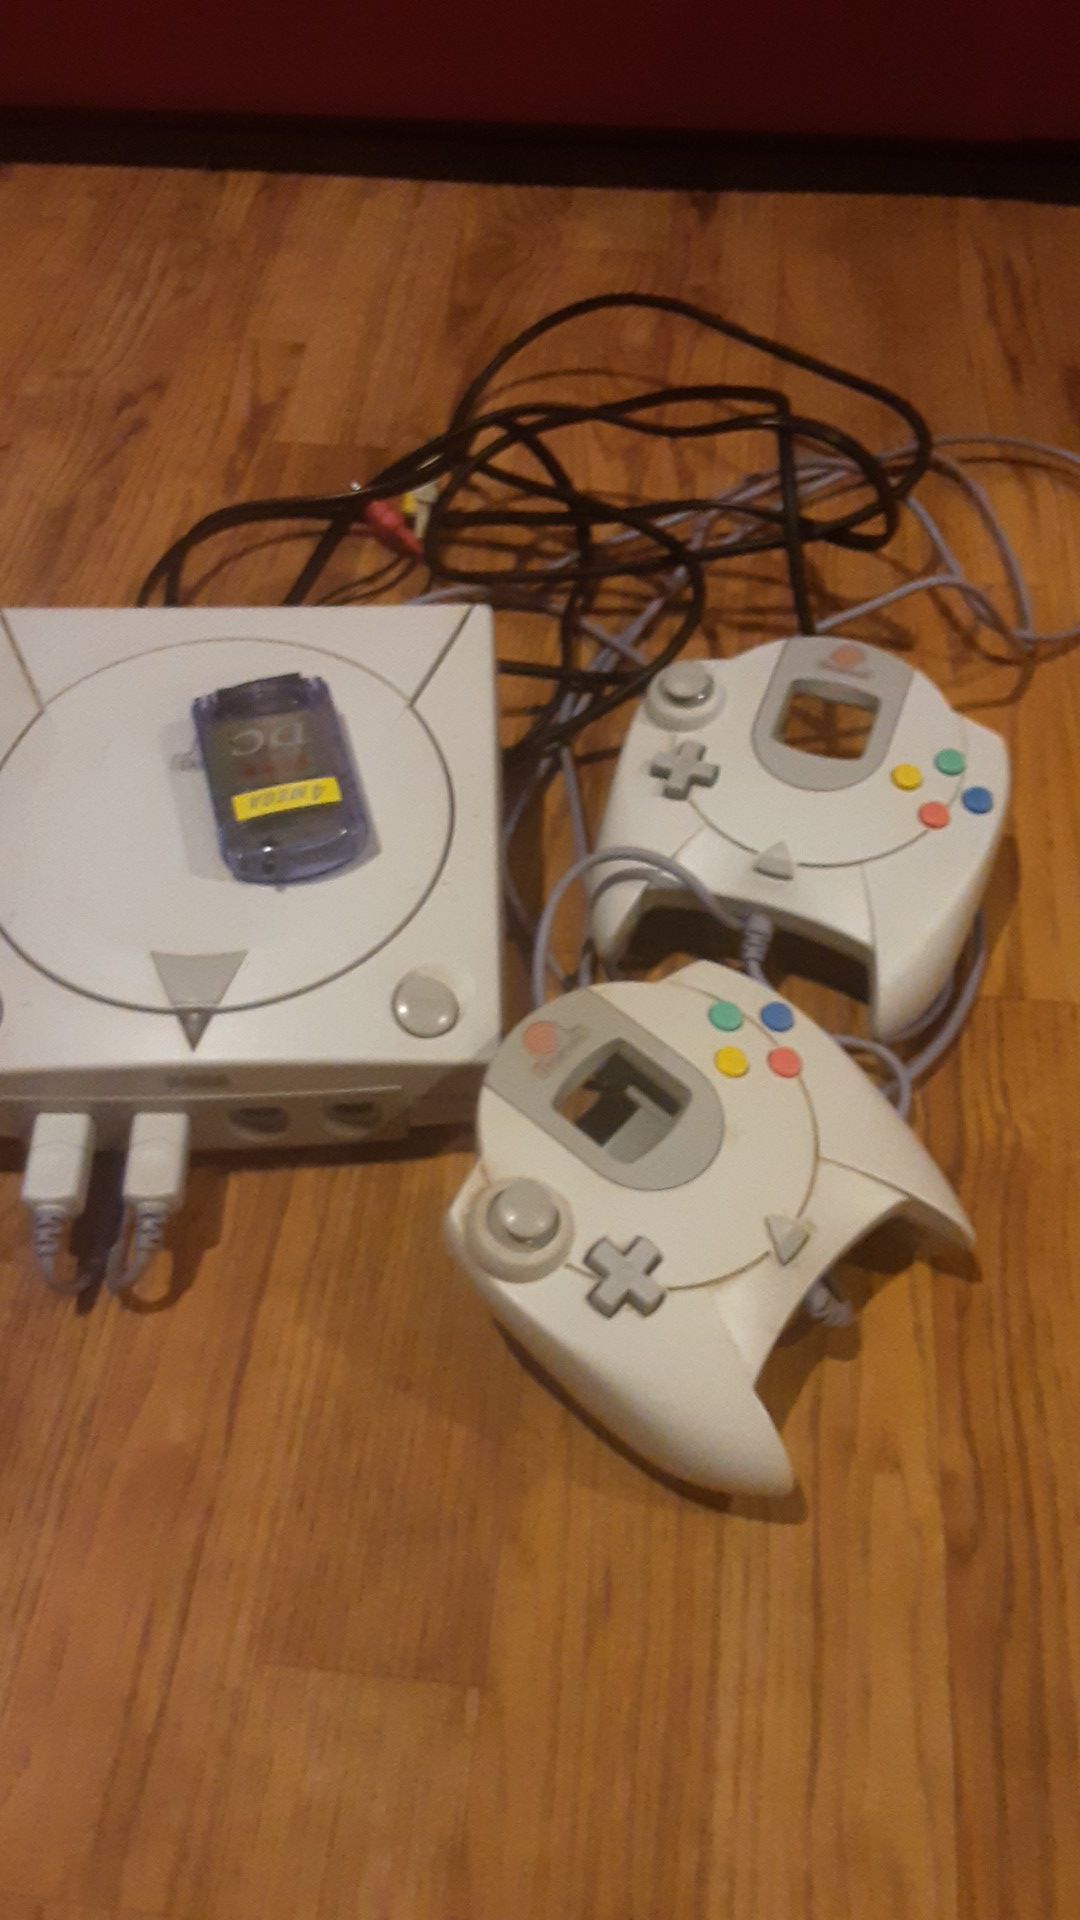 Dreamcast game